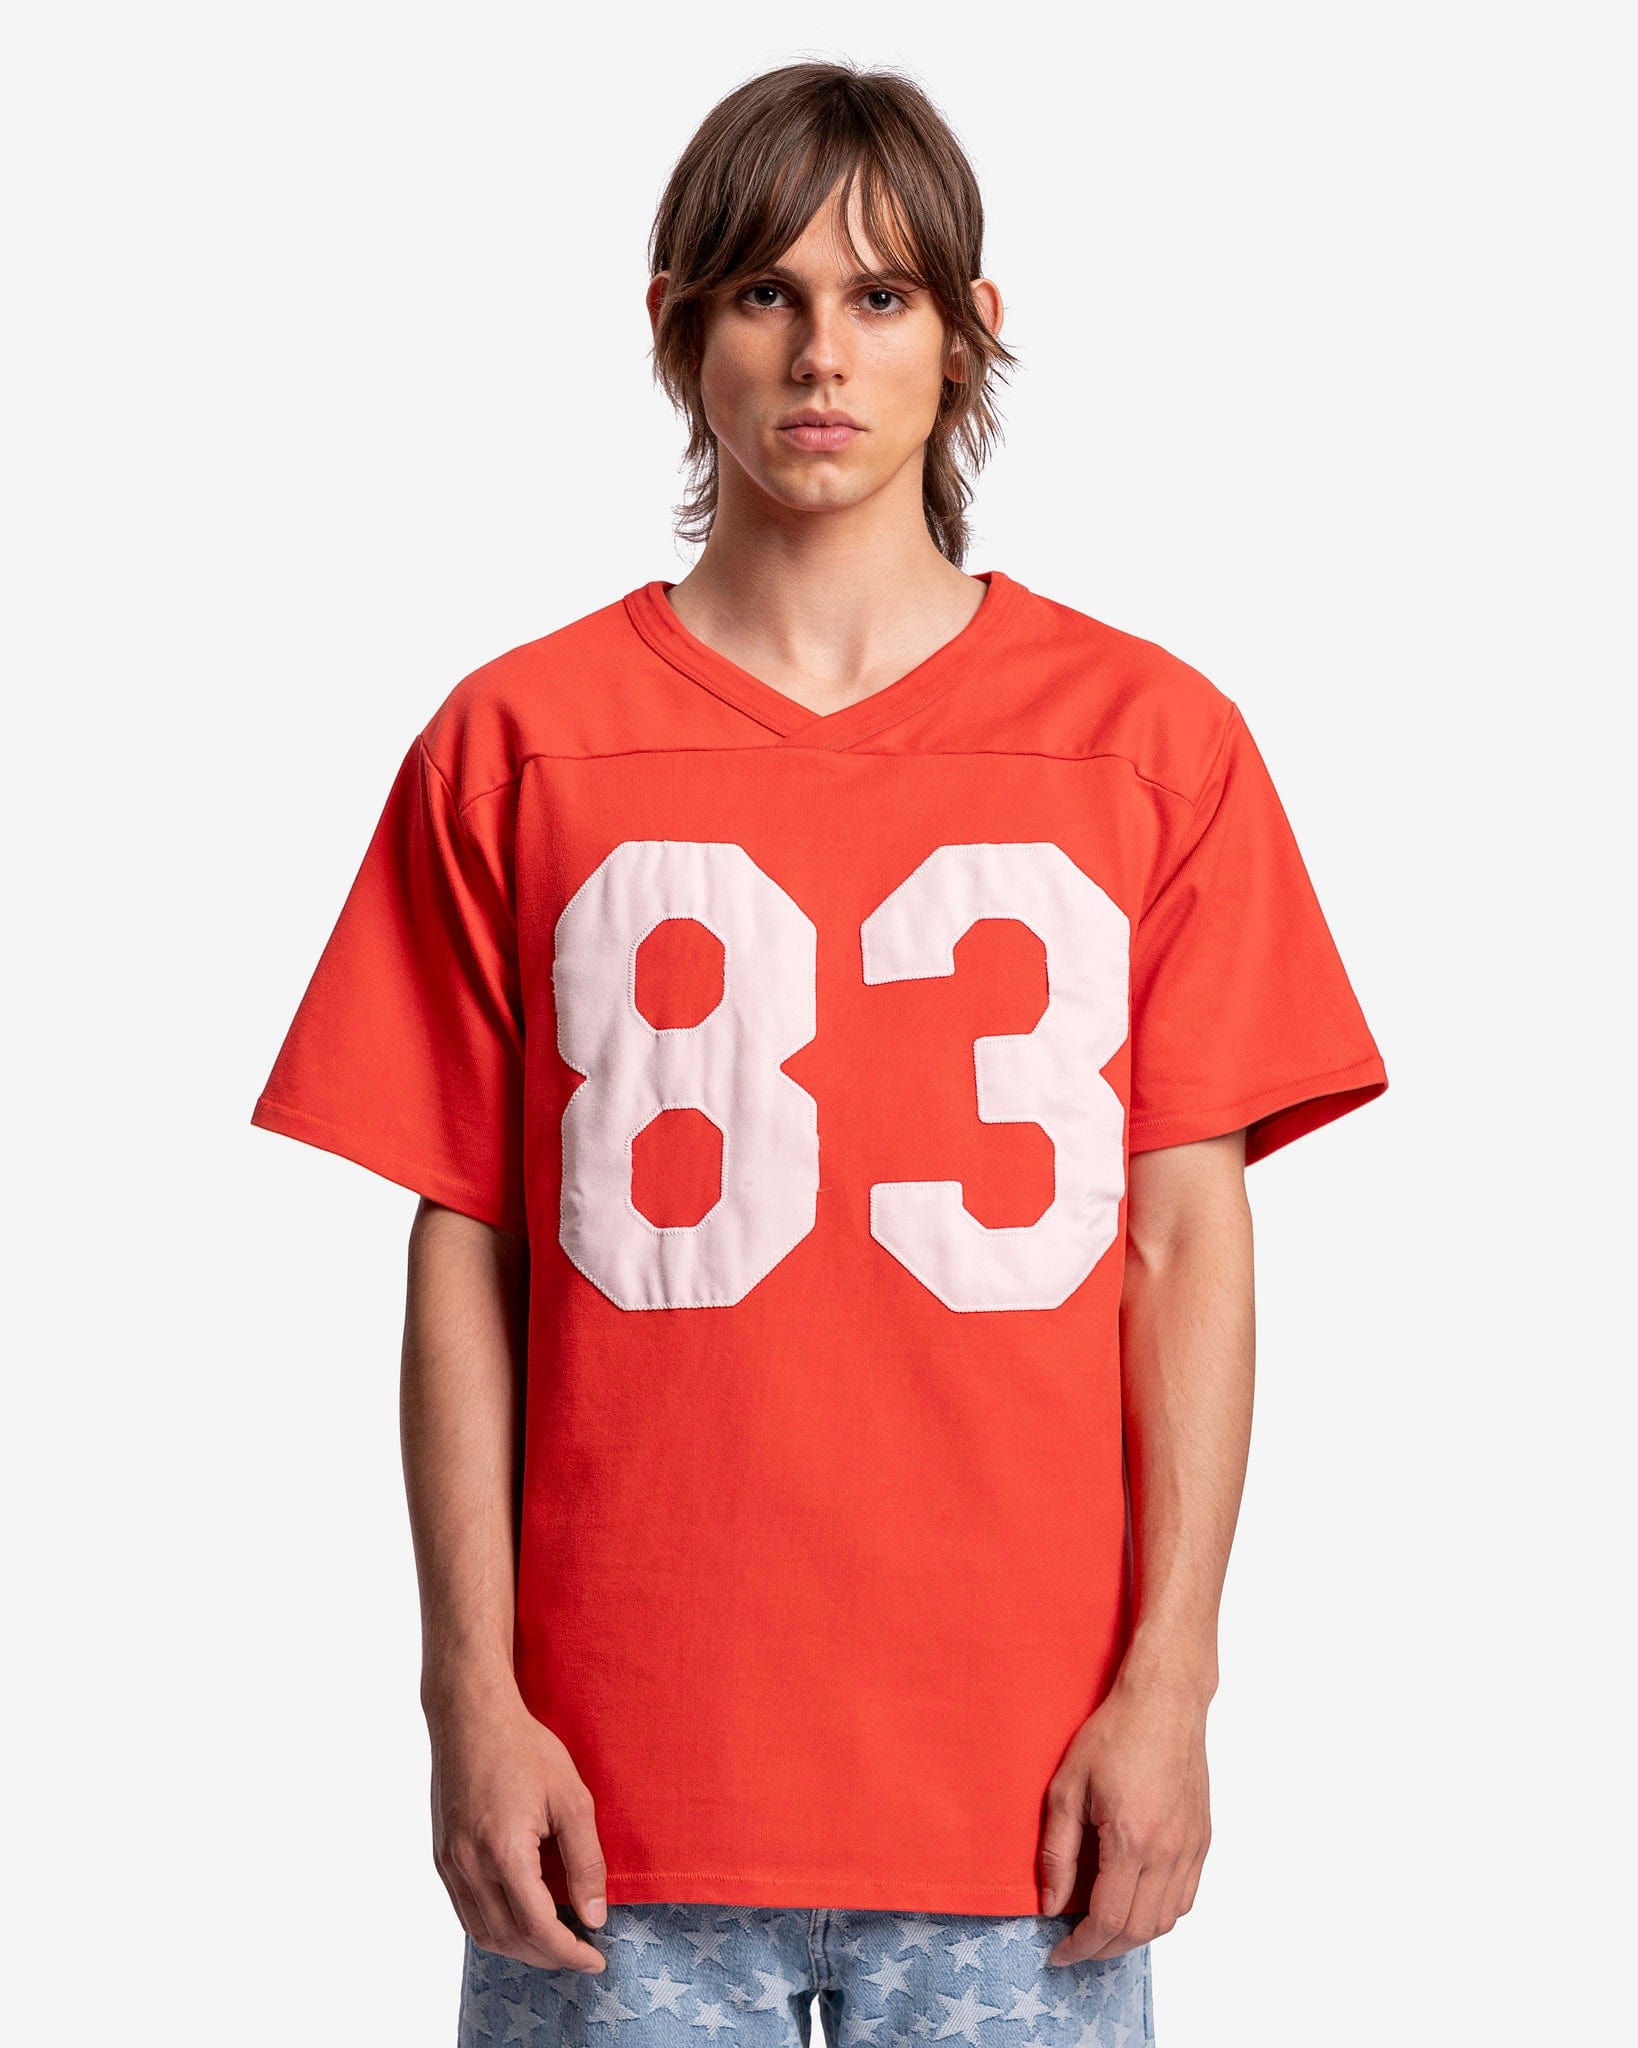 Football Knit Shirt in Red